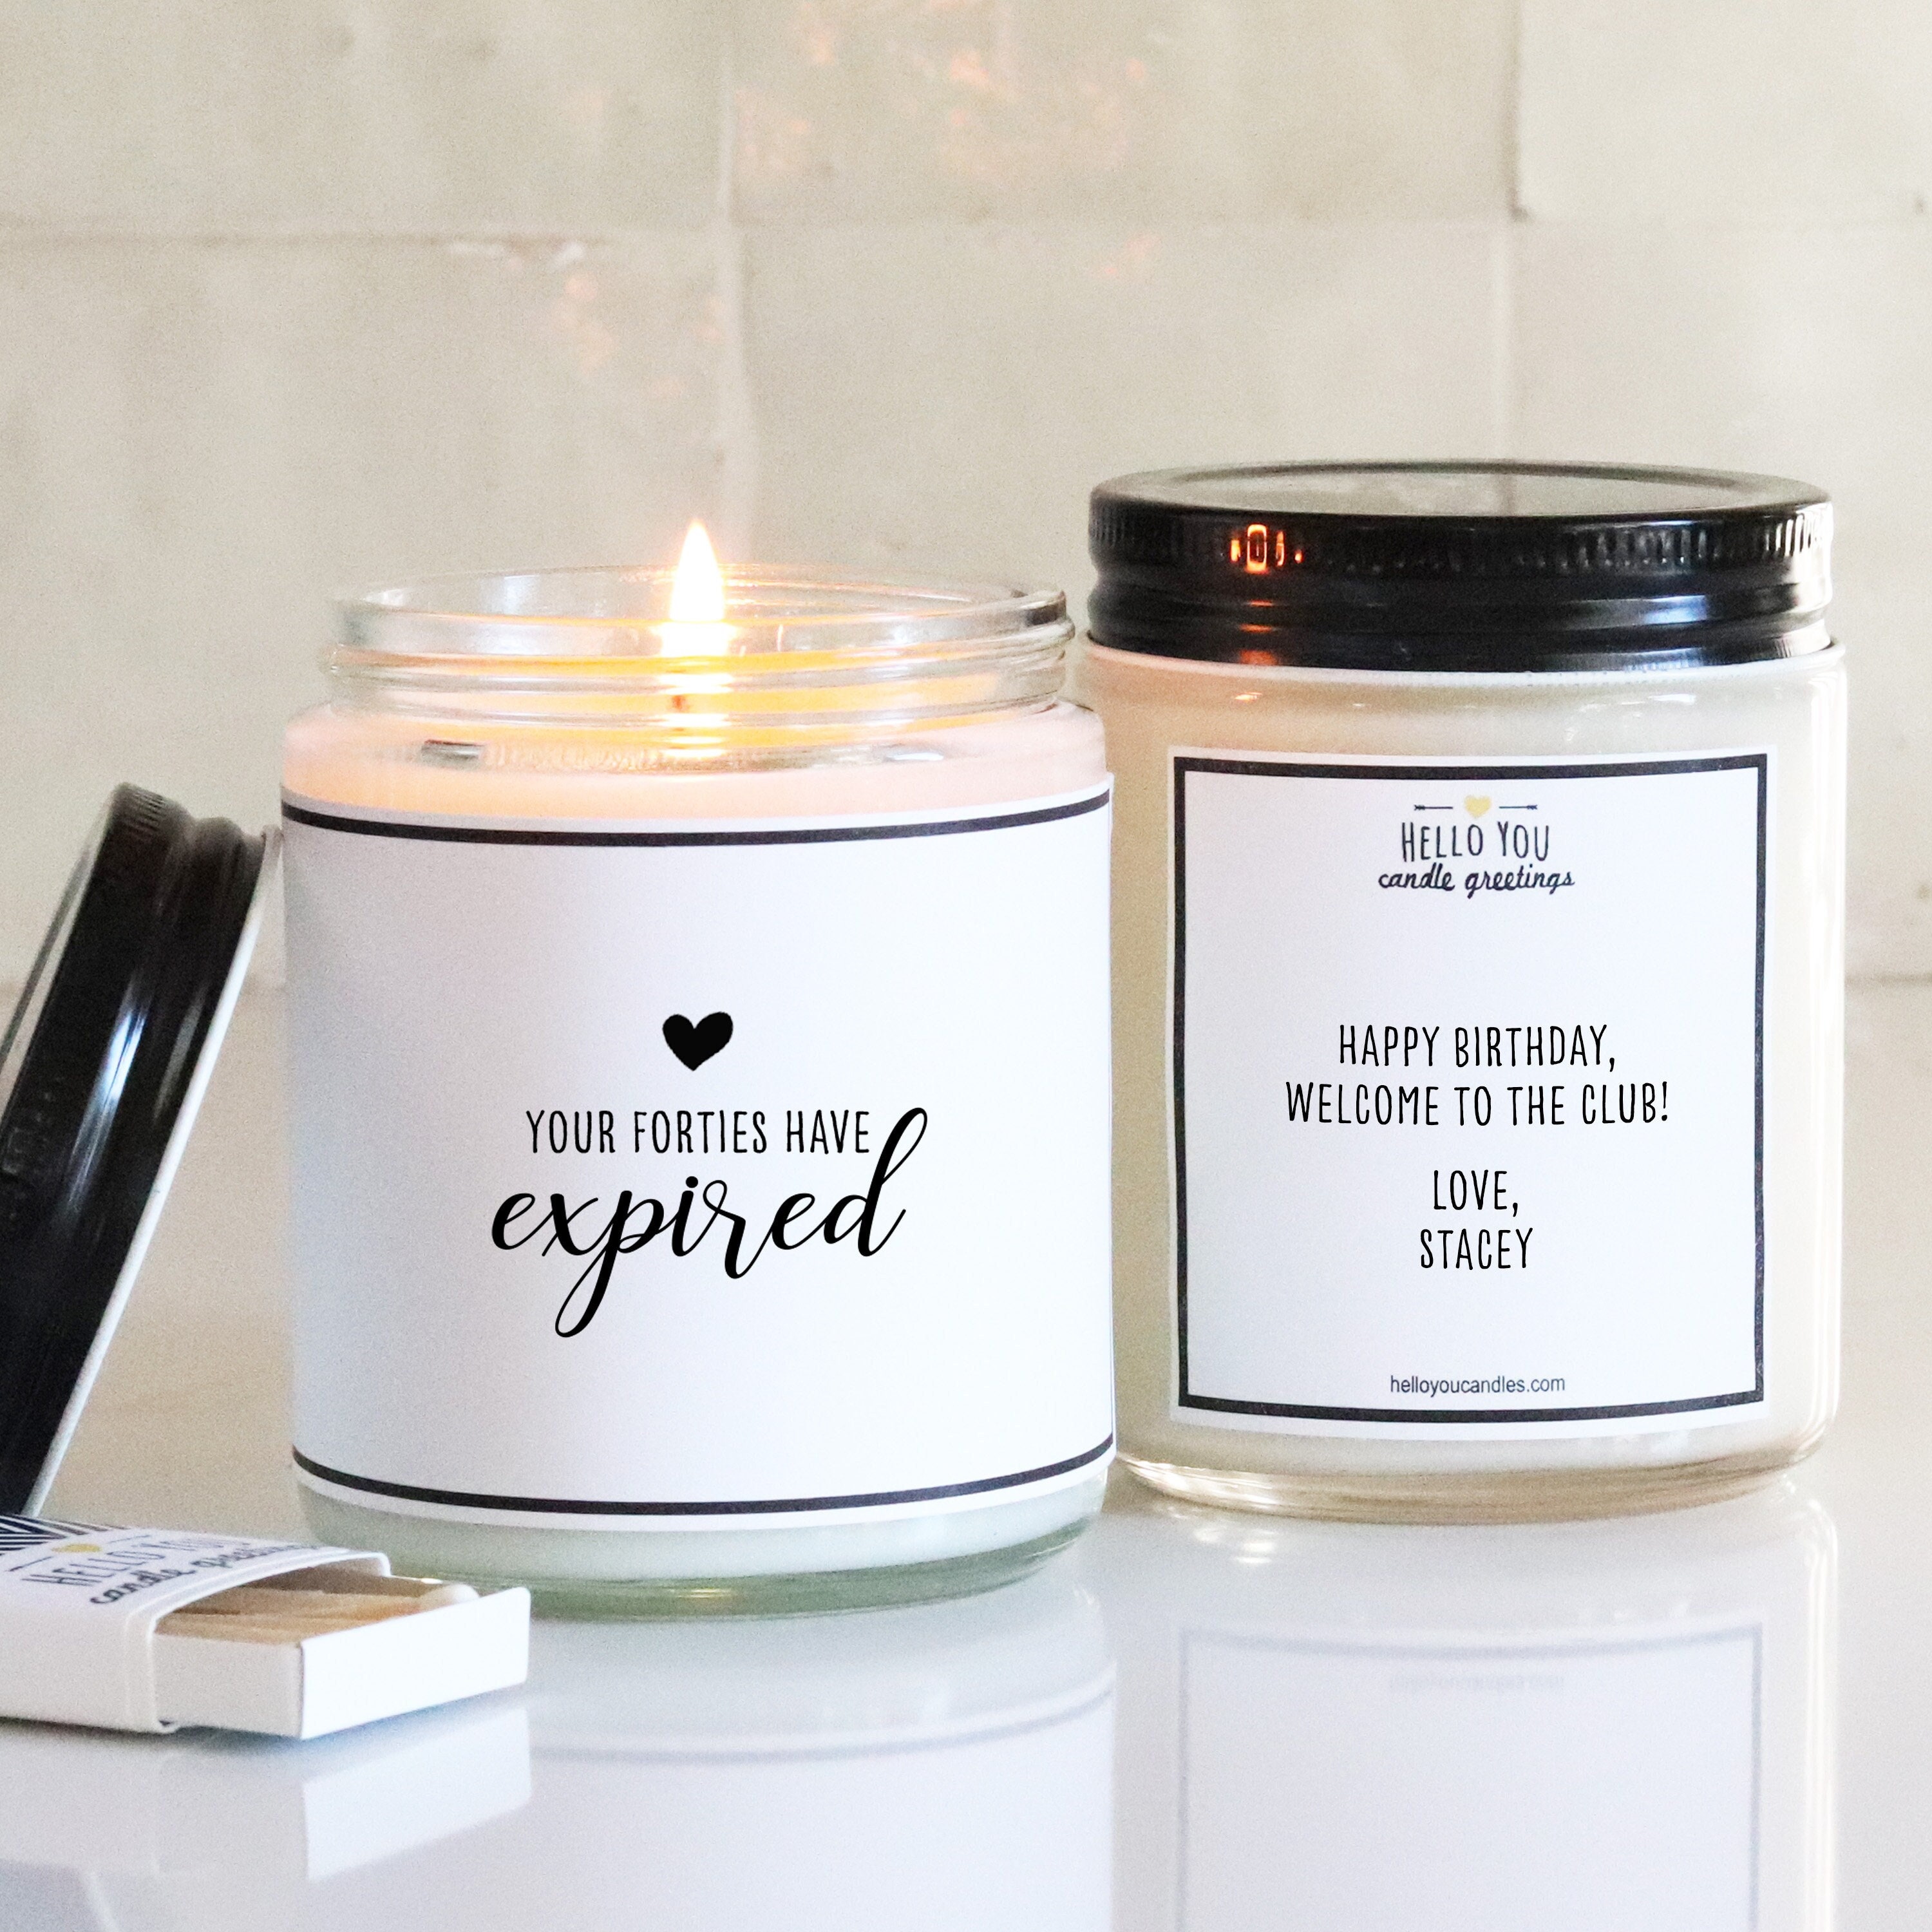 How Long Do Candles Last & Can They Expire?